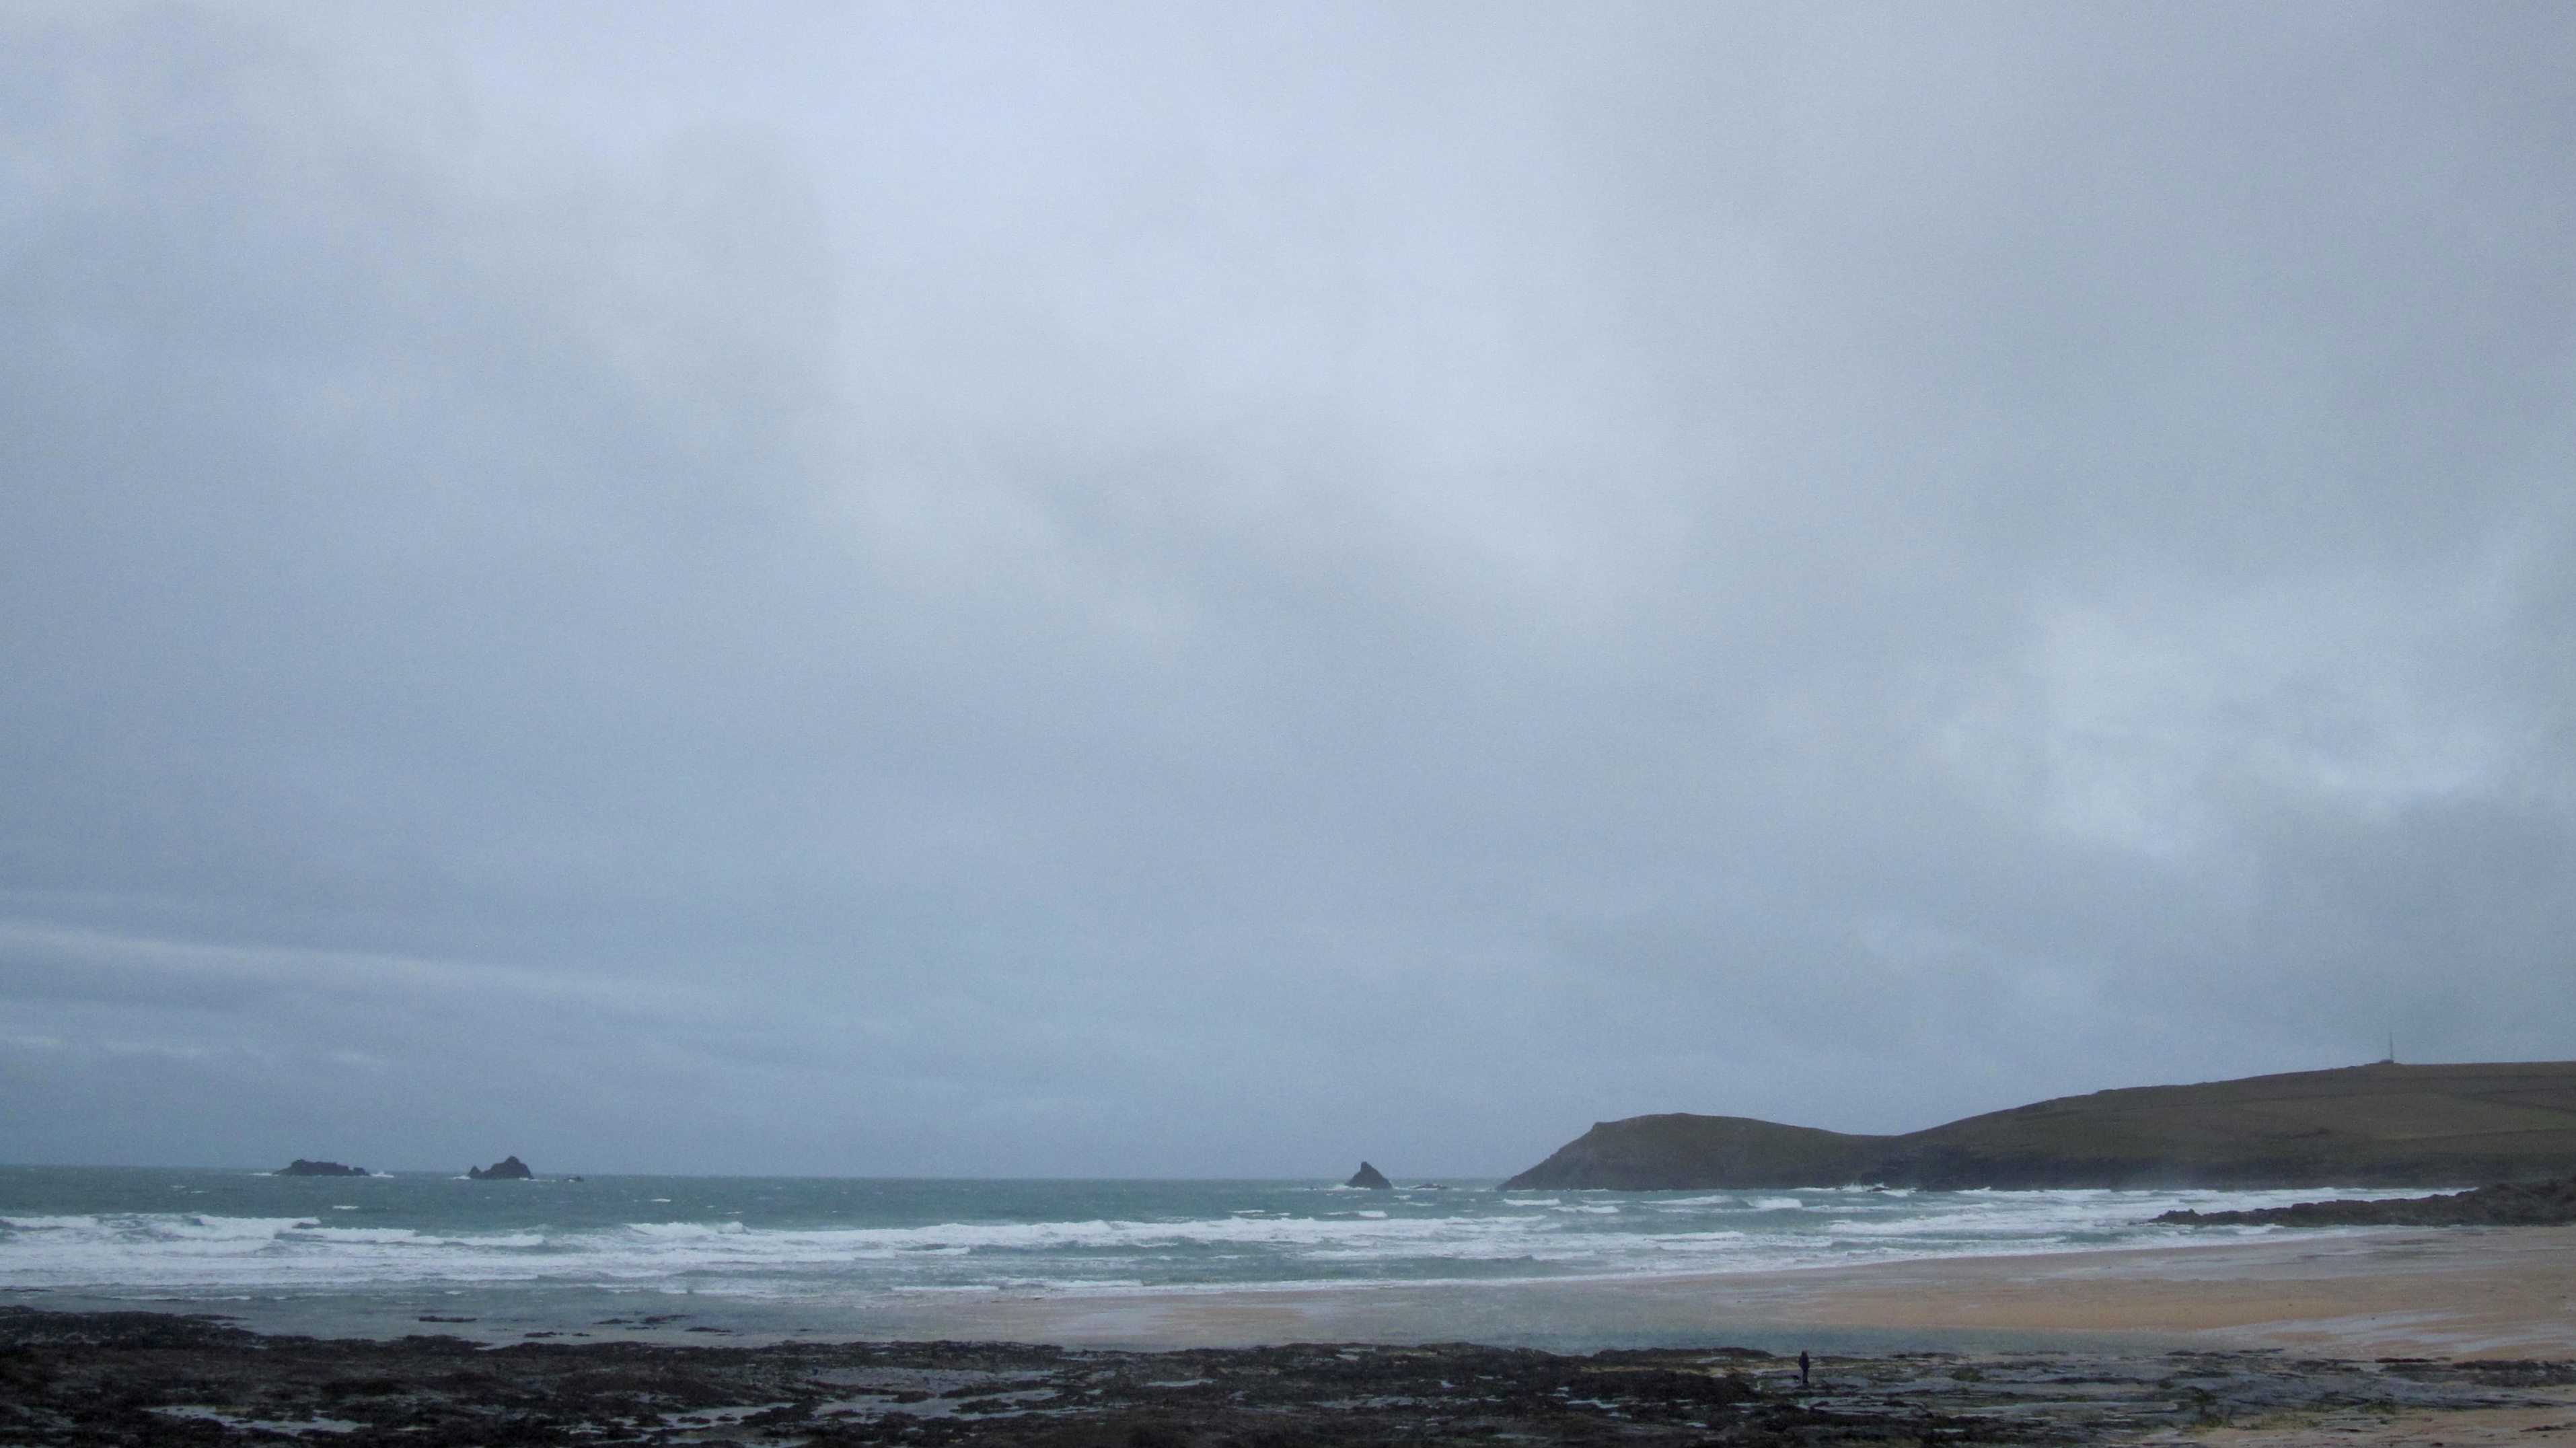 Surf Report for Wednesday 25th November 2015